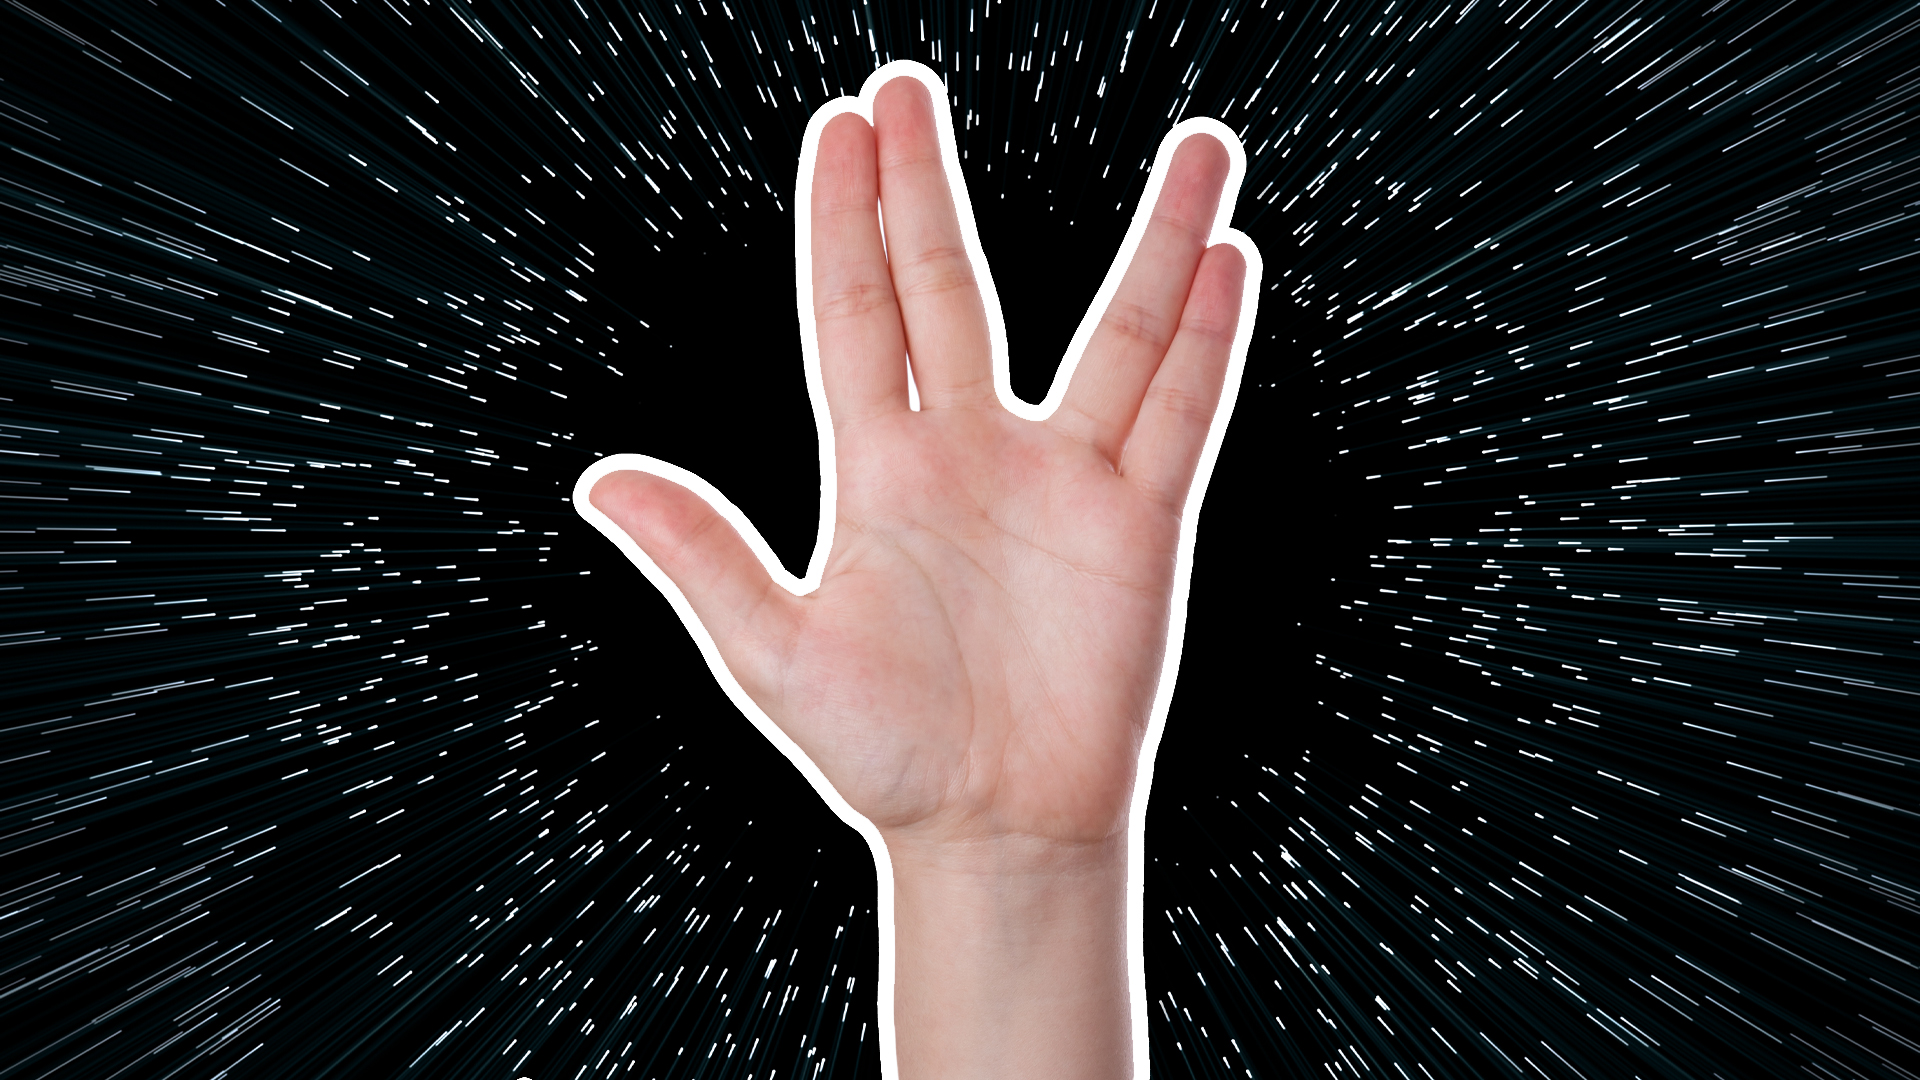 A space hand sign